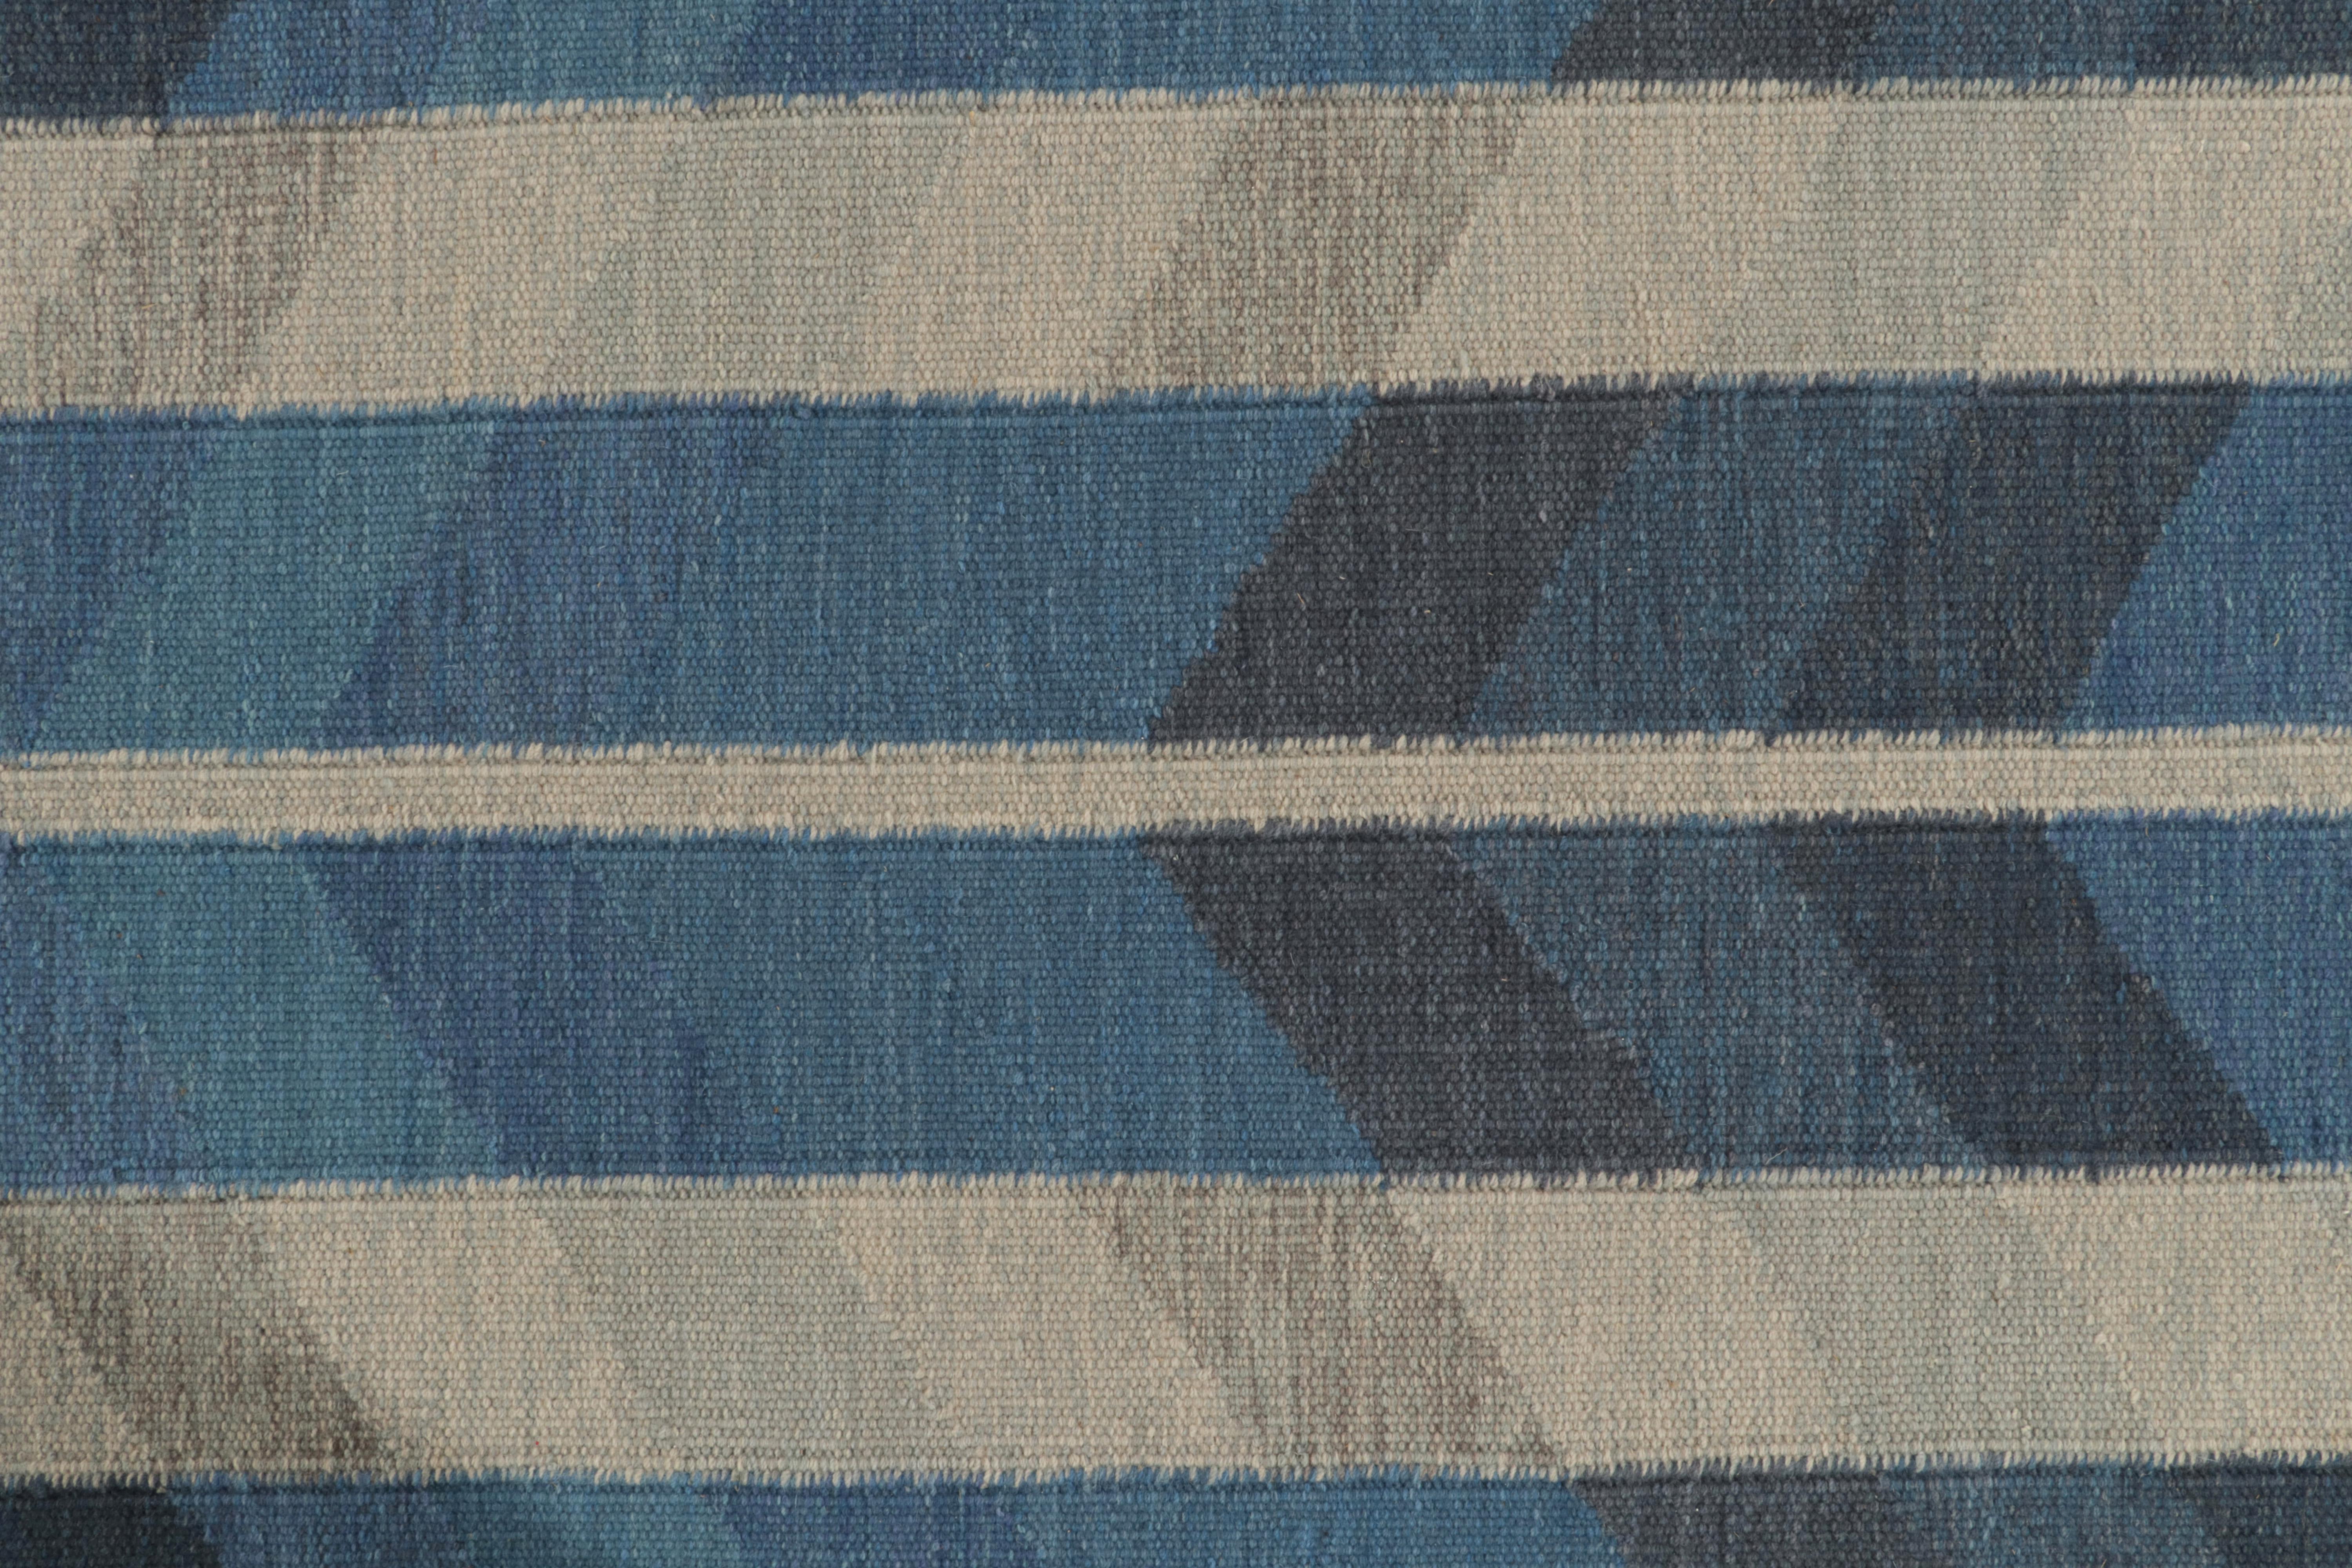 Rug & Kilim's Scandinavian Style Kilim Rug in Blue, Beige-Gray Chevron Pattern In New Condition For Sale In Long Island City, NY